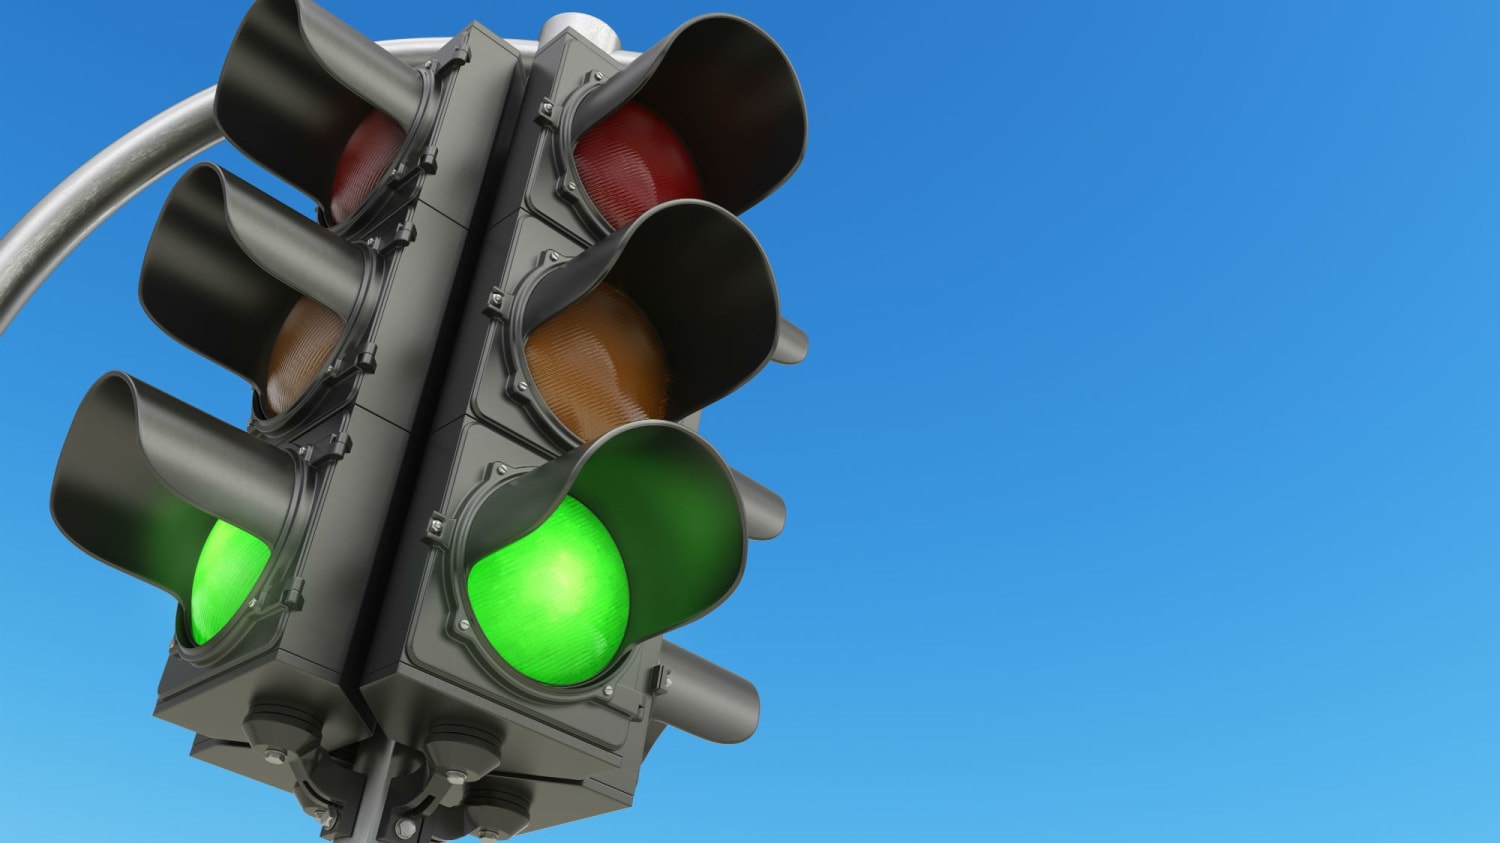 The Reason Traffic Lights Are Red, Yellow, and Green